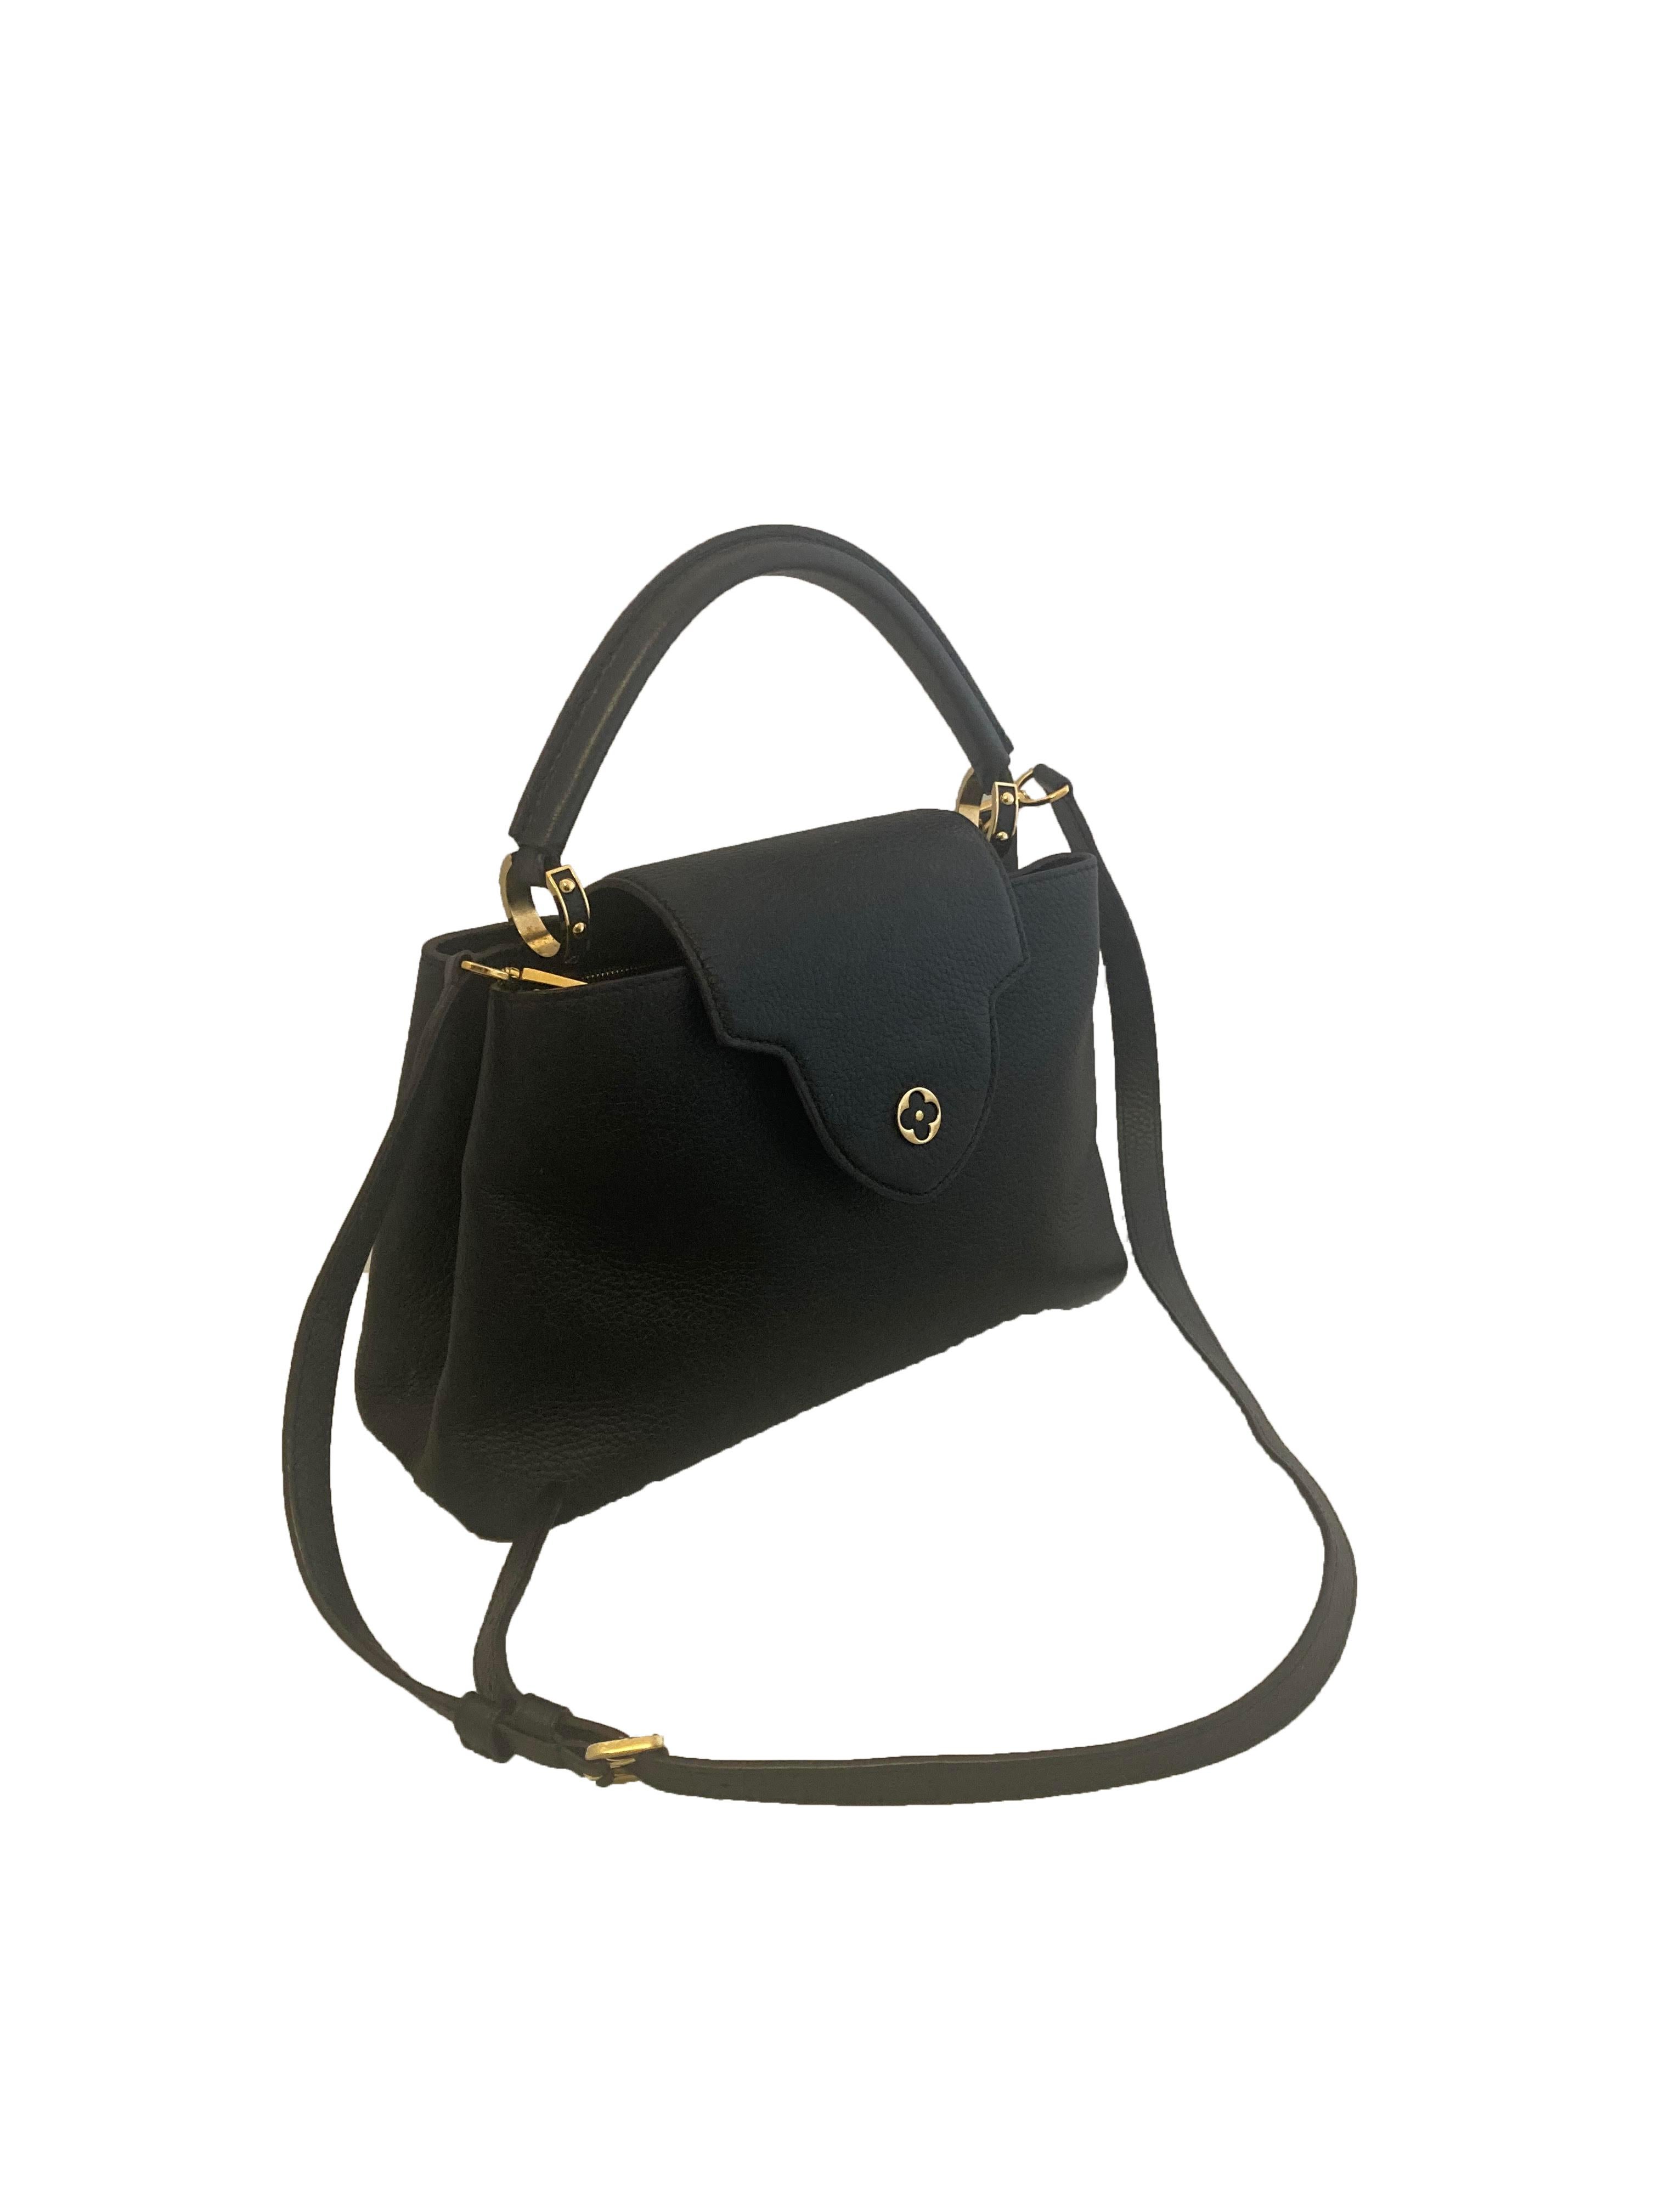 Black Leather Louis Vuitton Capucine BB Shoulder Bag In Good Condition For Sale In Glasgow, GB